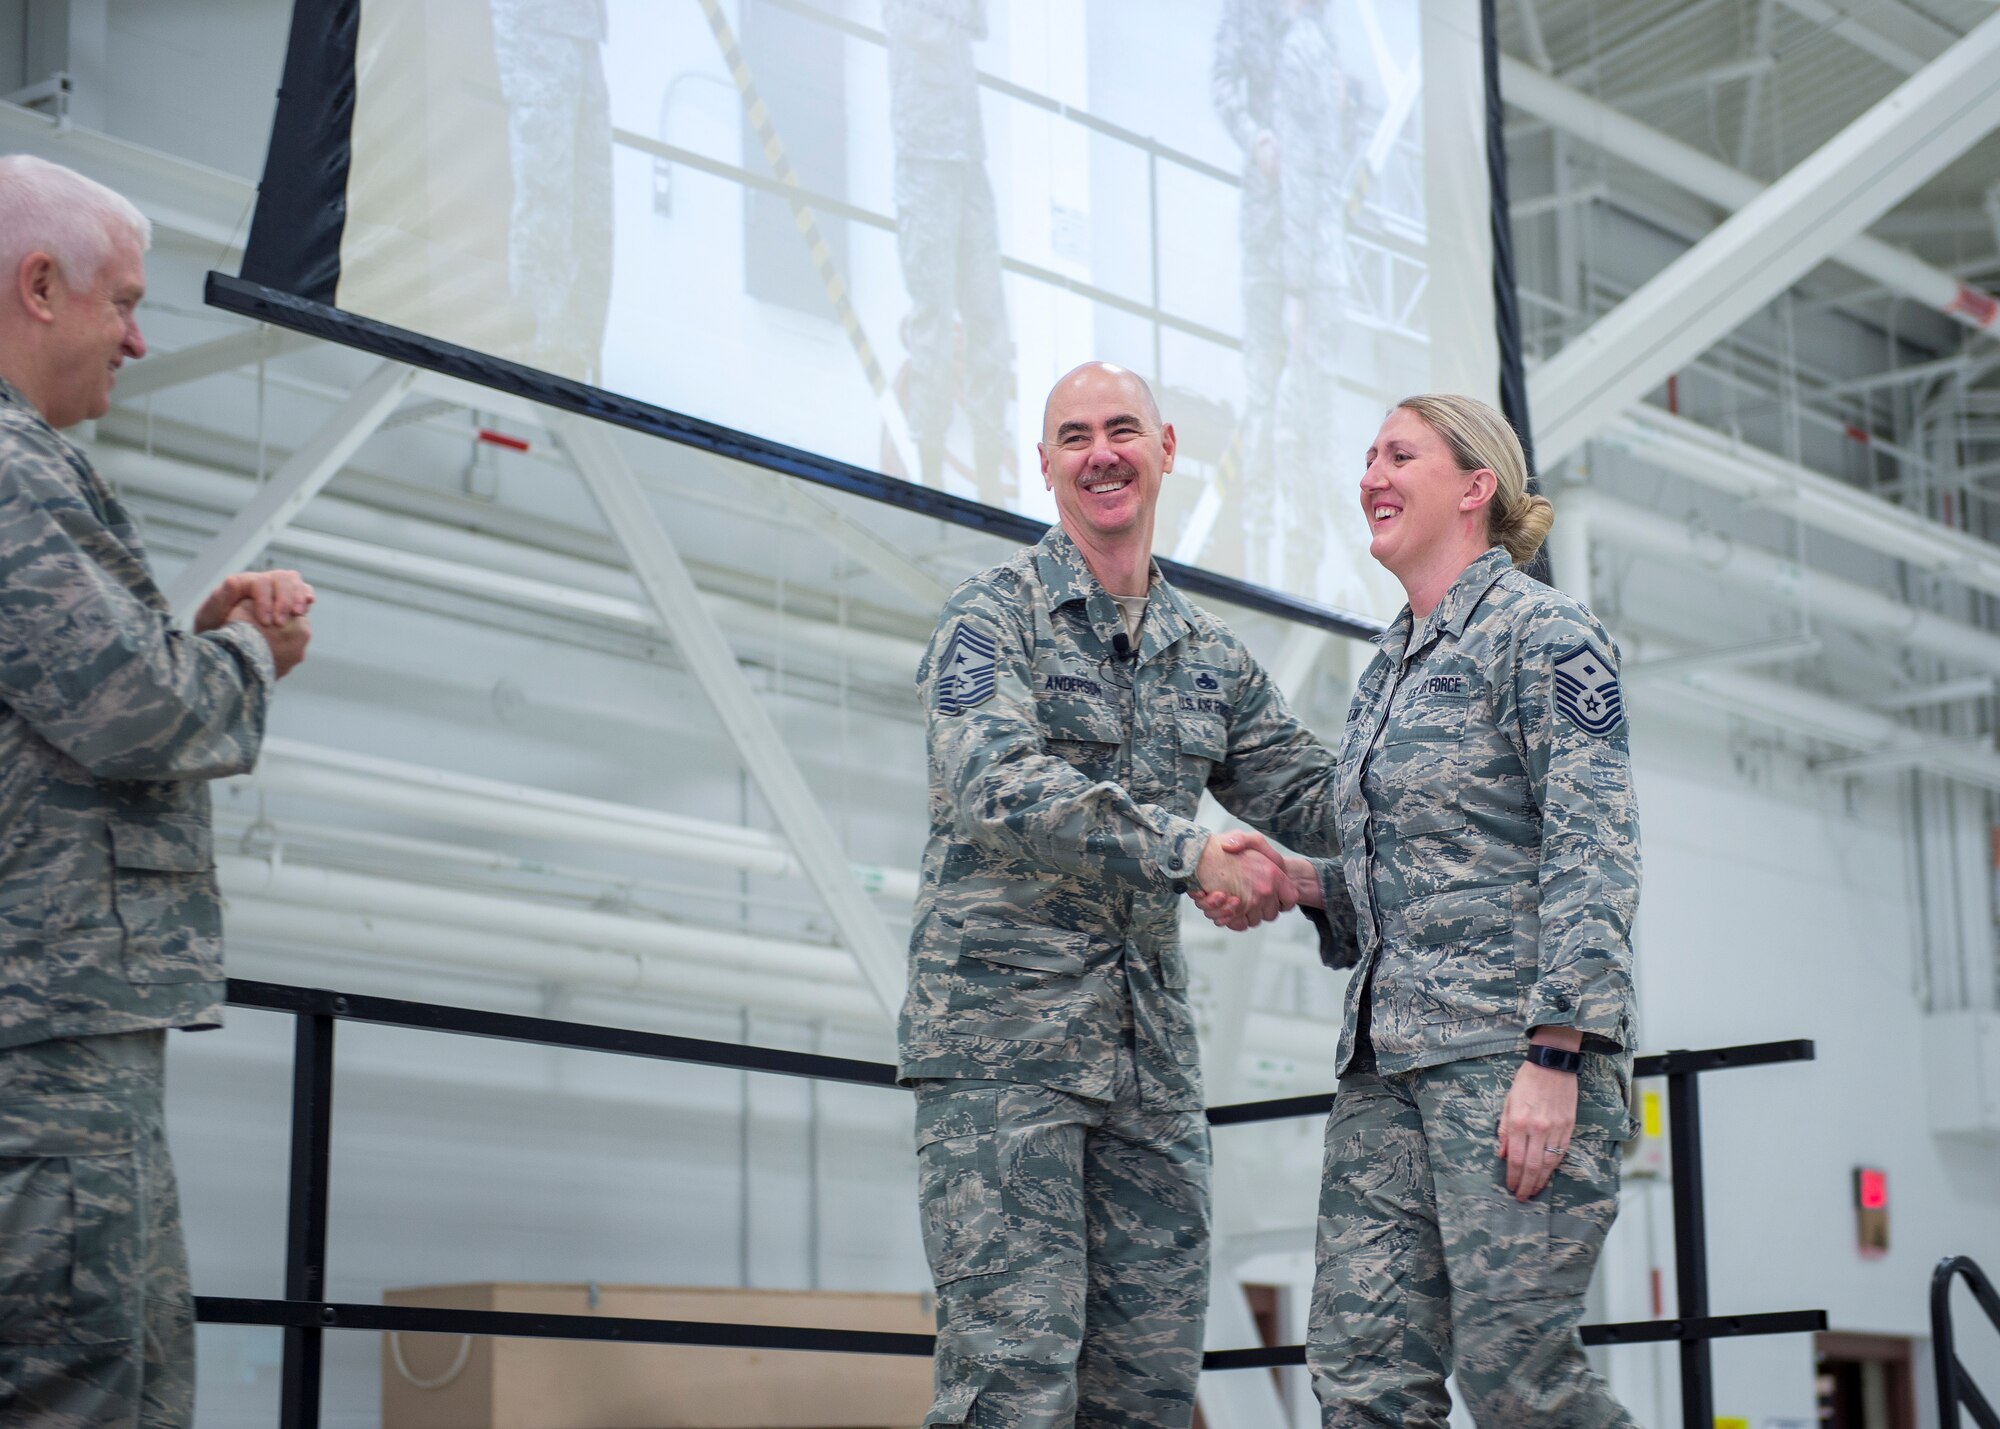 U.S. Air Force Master Sgt. Nicole Martland, first sergeant with the 133rd Civil Engineer Squadron, is recognized and coined for going above and beyond in maintaining contact with deployed airmen and their families in St. Paul, Minn., March 25, 2018.